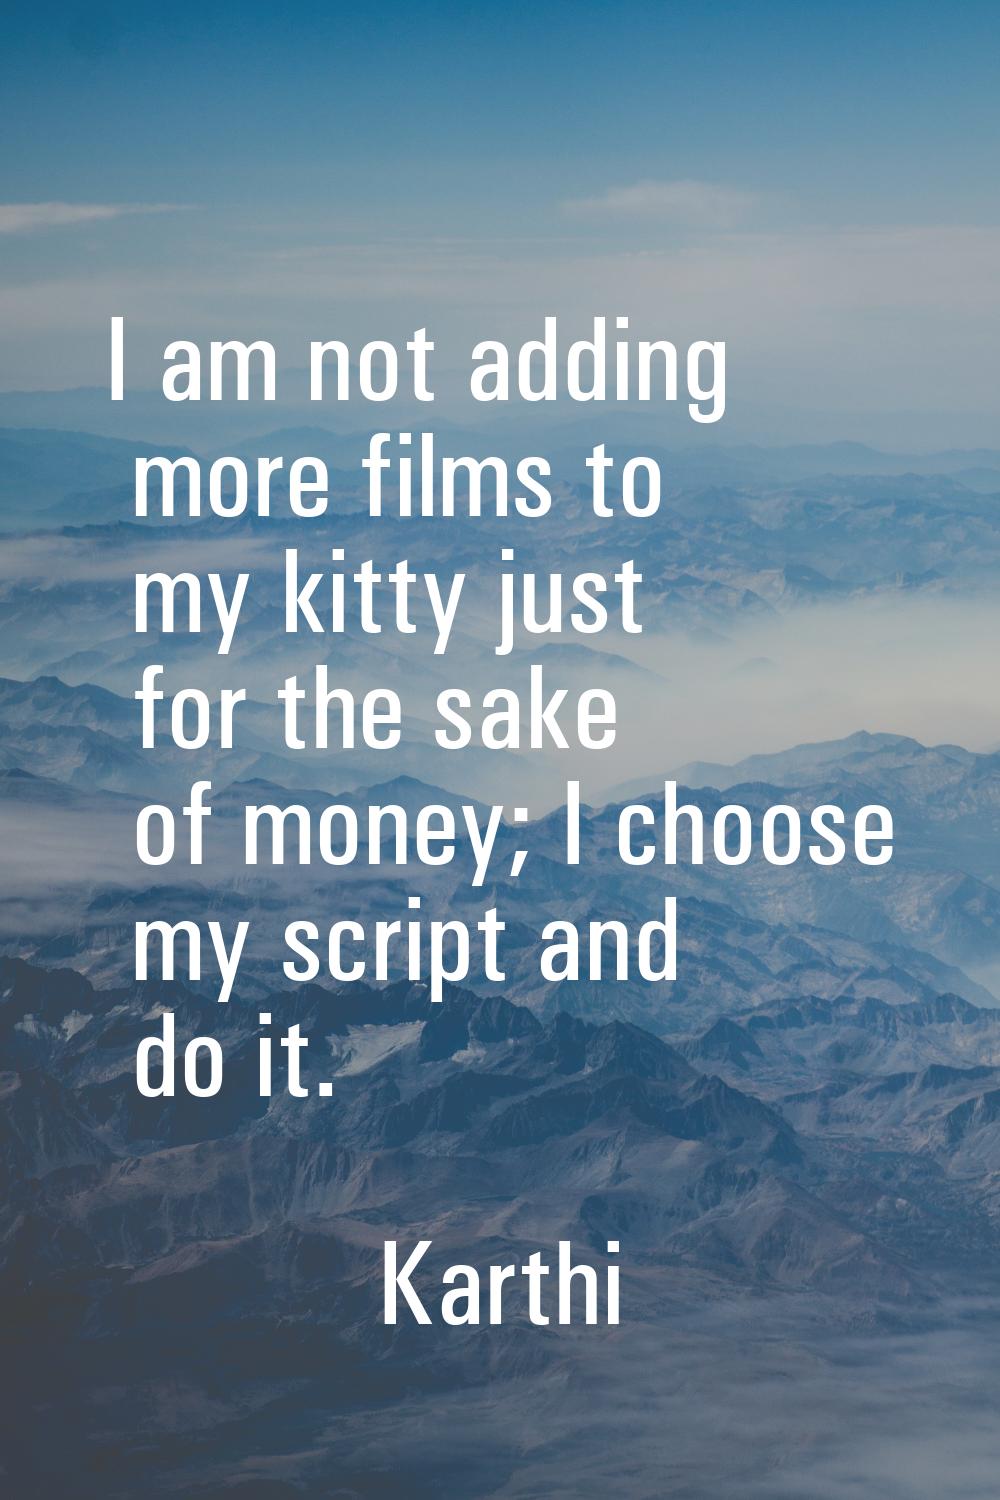 I am not adding more films to my kitty just for the sake of money; I choose my script and do it.